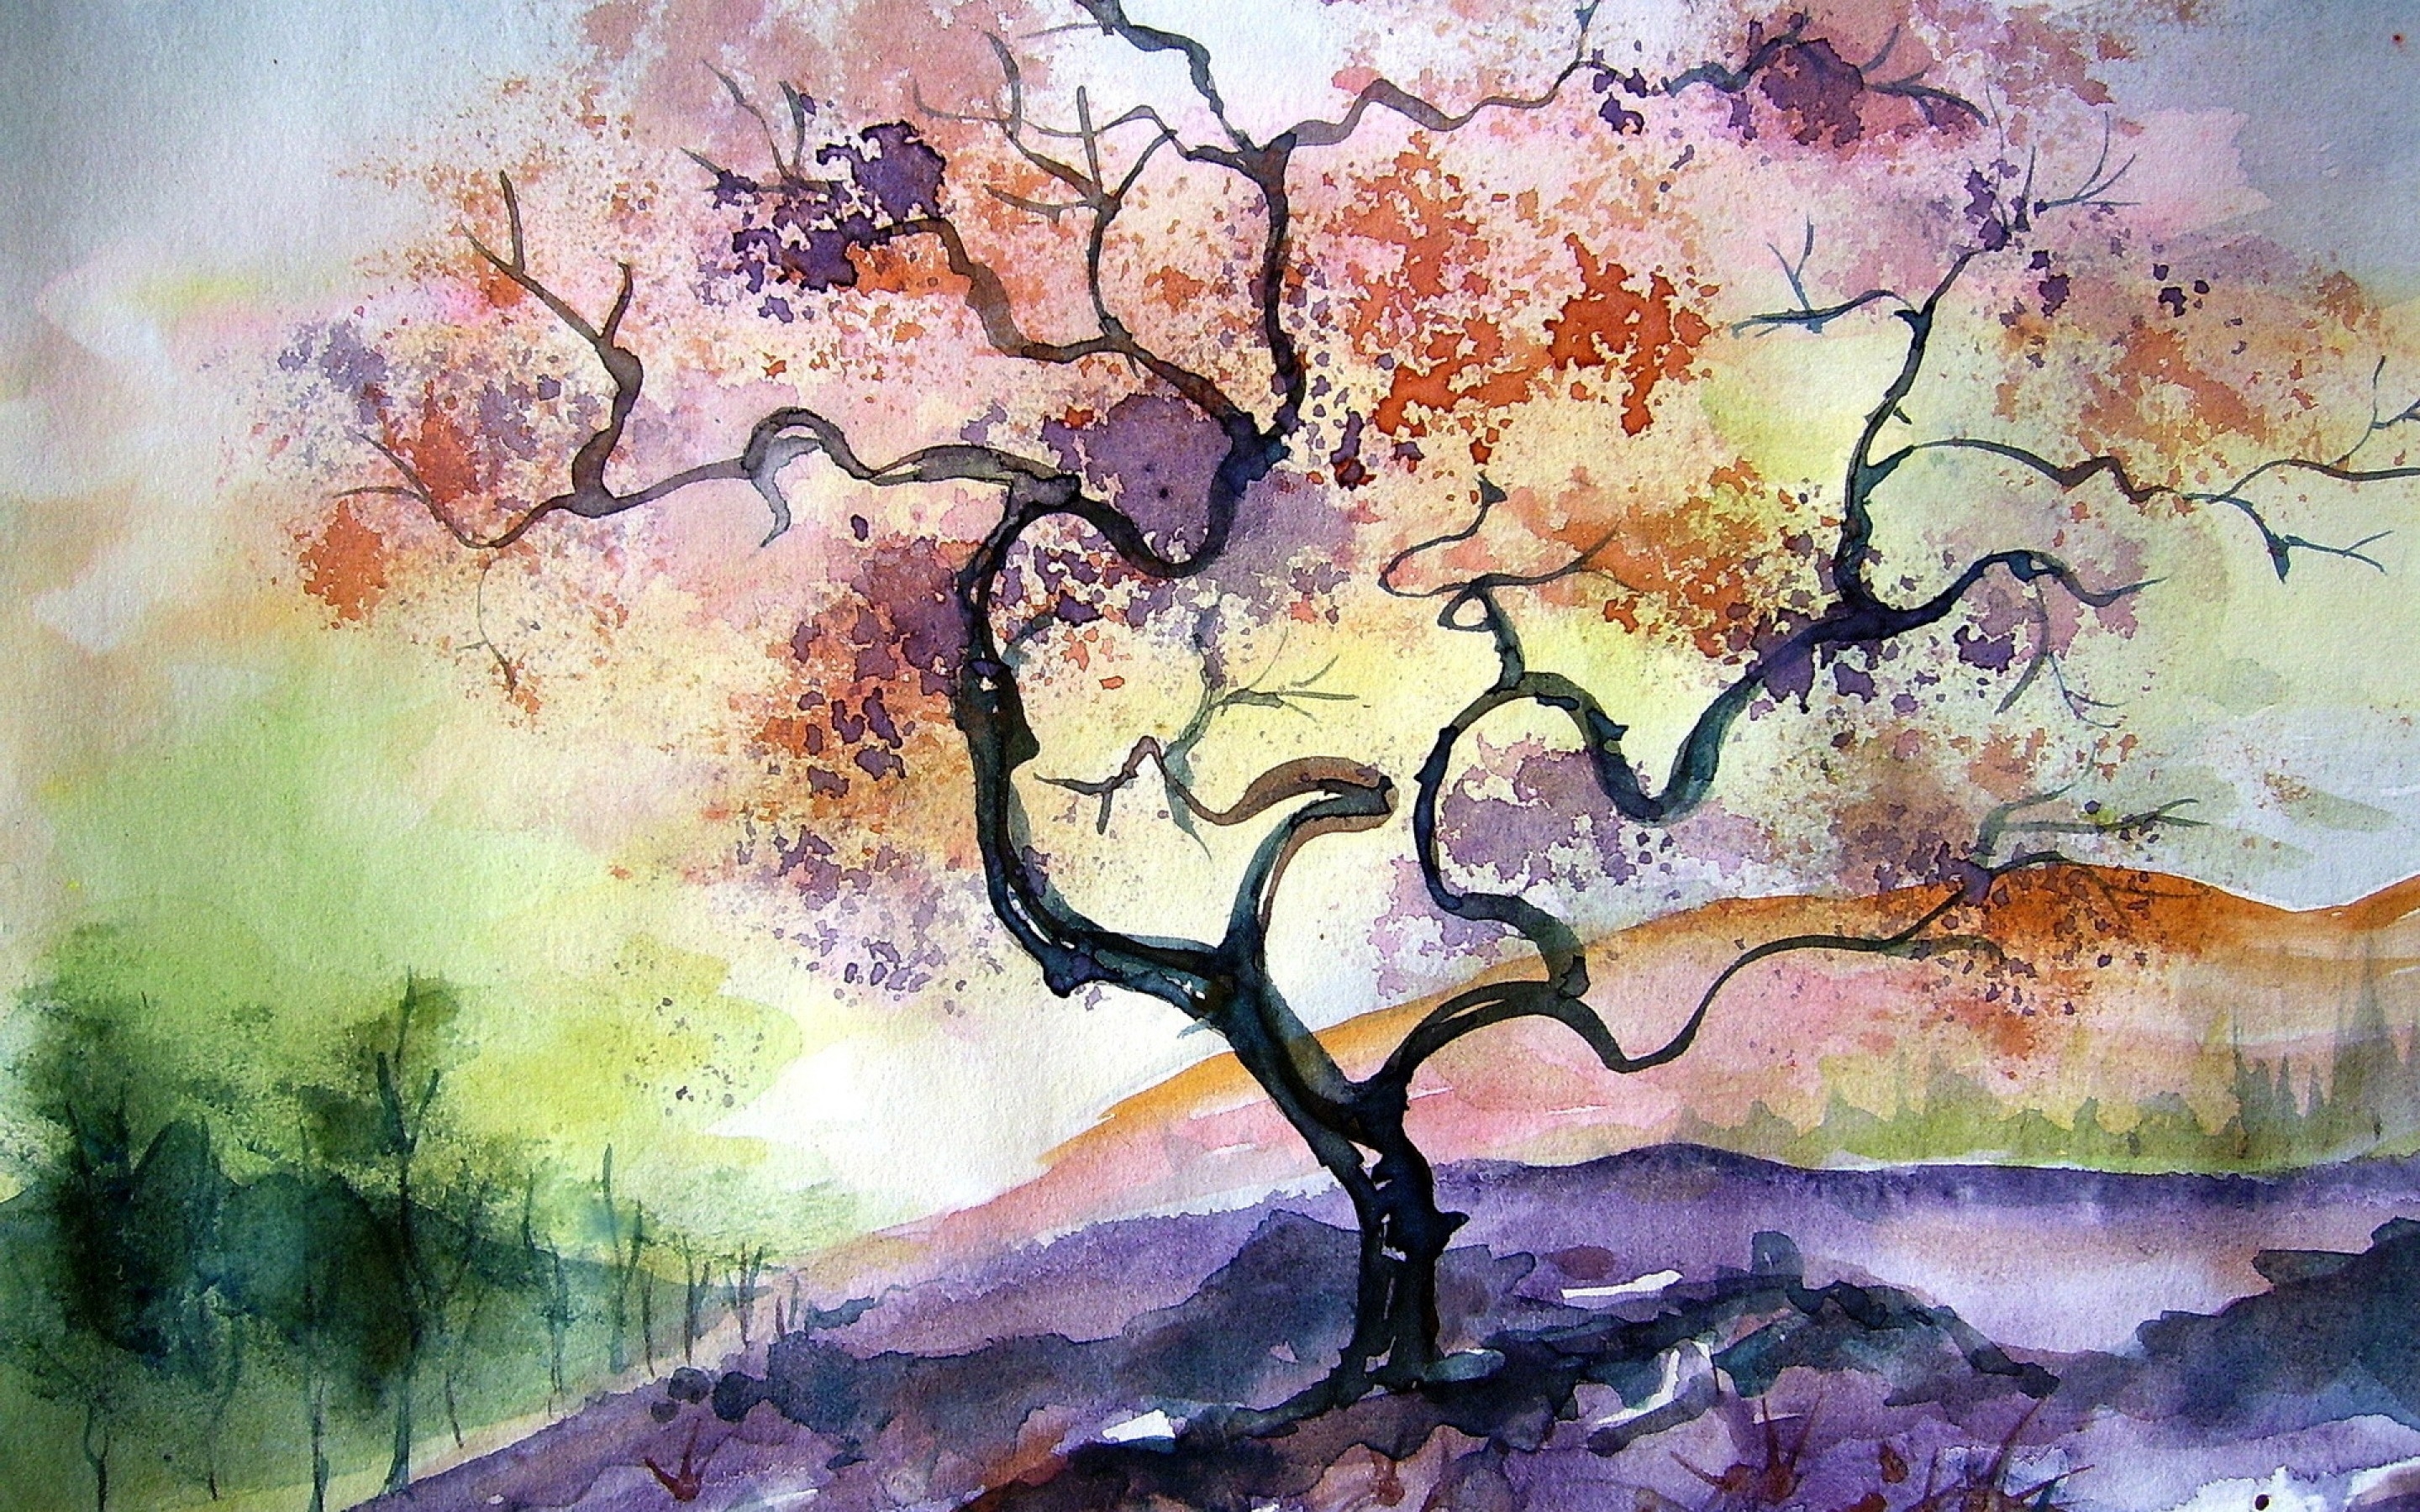 wallpapers watercolor,watercolor paint,tree,painting,acrylic paint,blossom